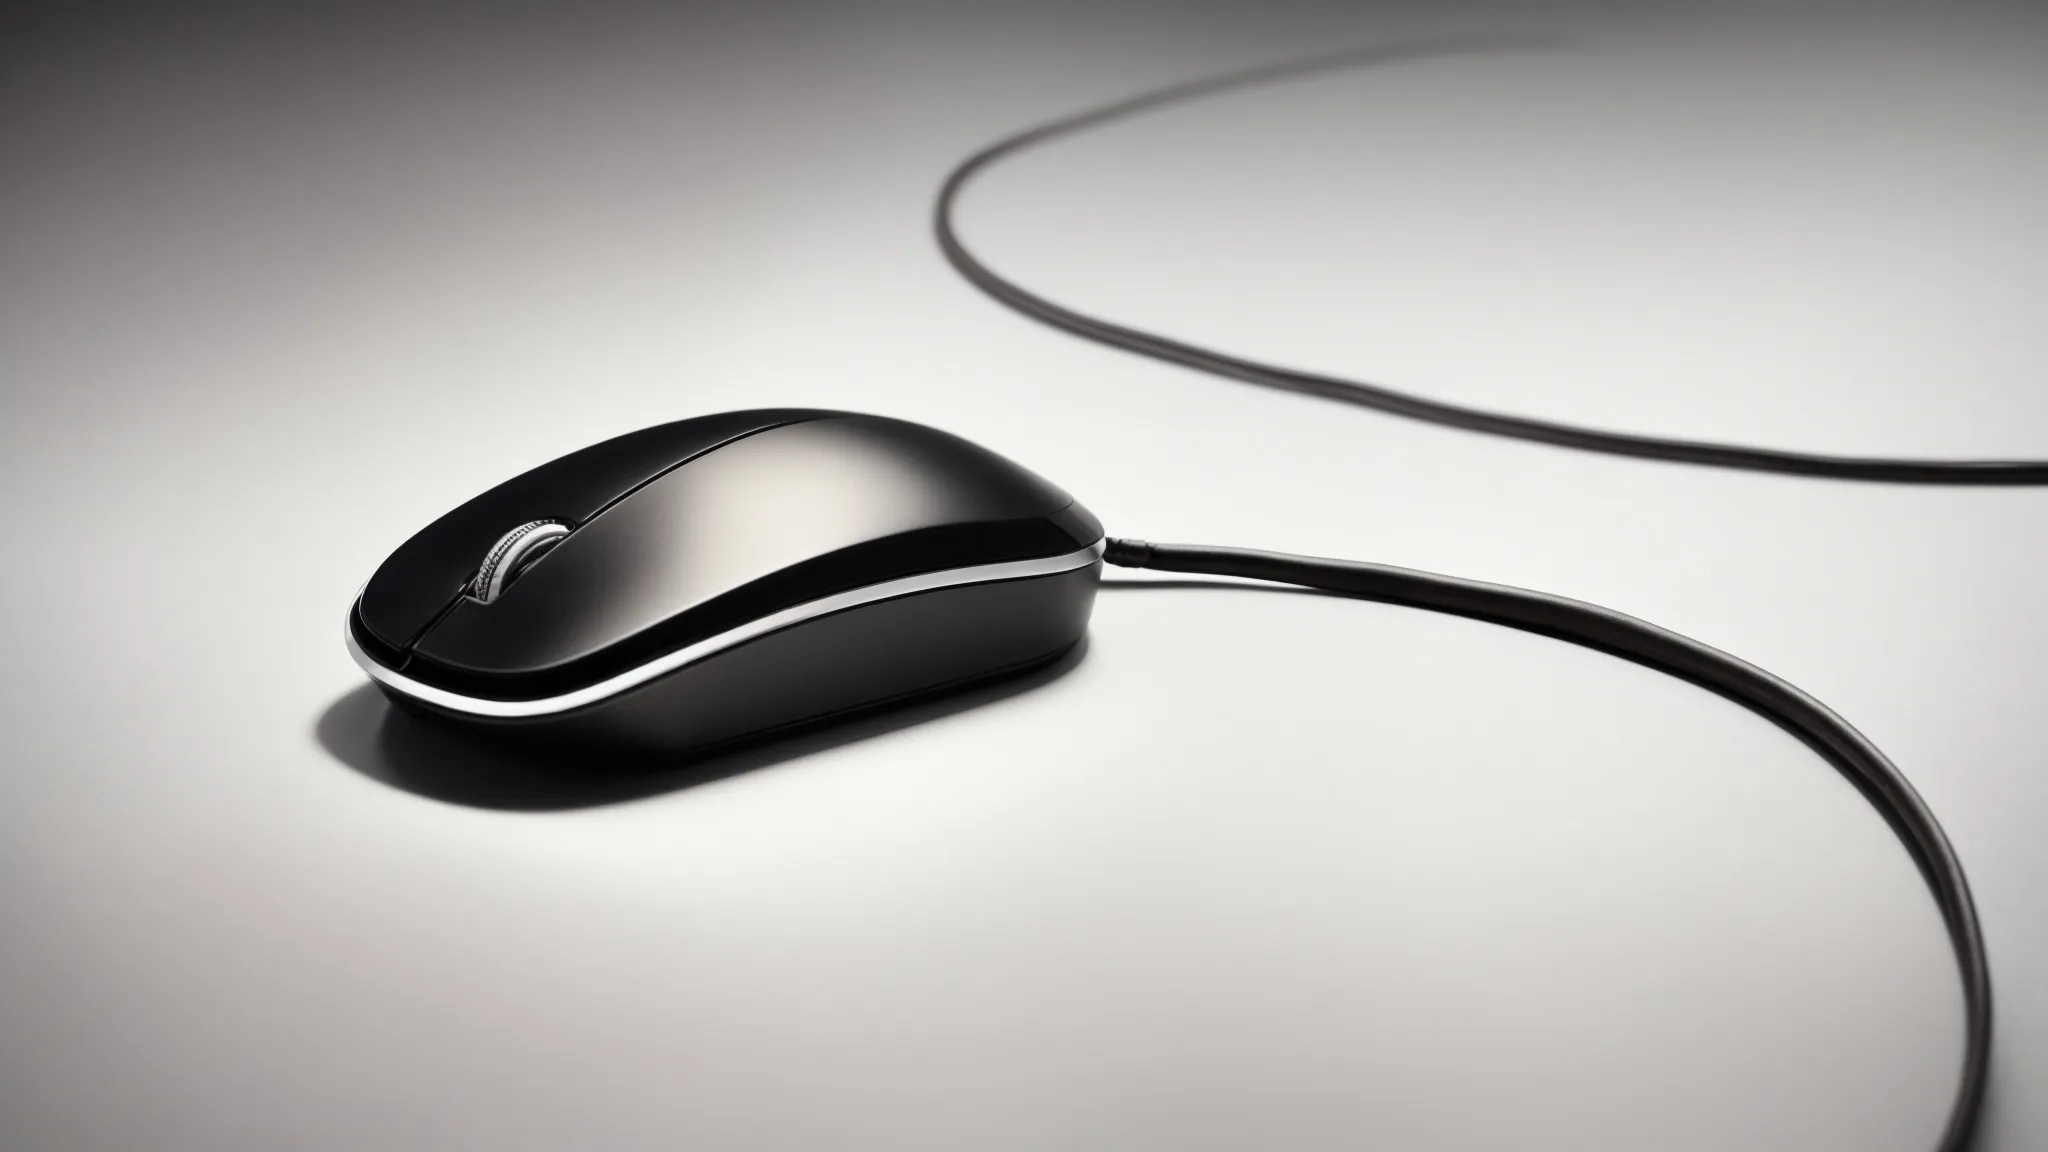 a close-up of a sleek, modern computer mouse next to a highlighted hyperlink on a web page.